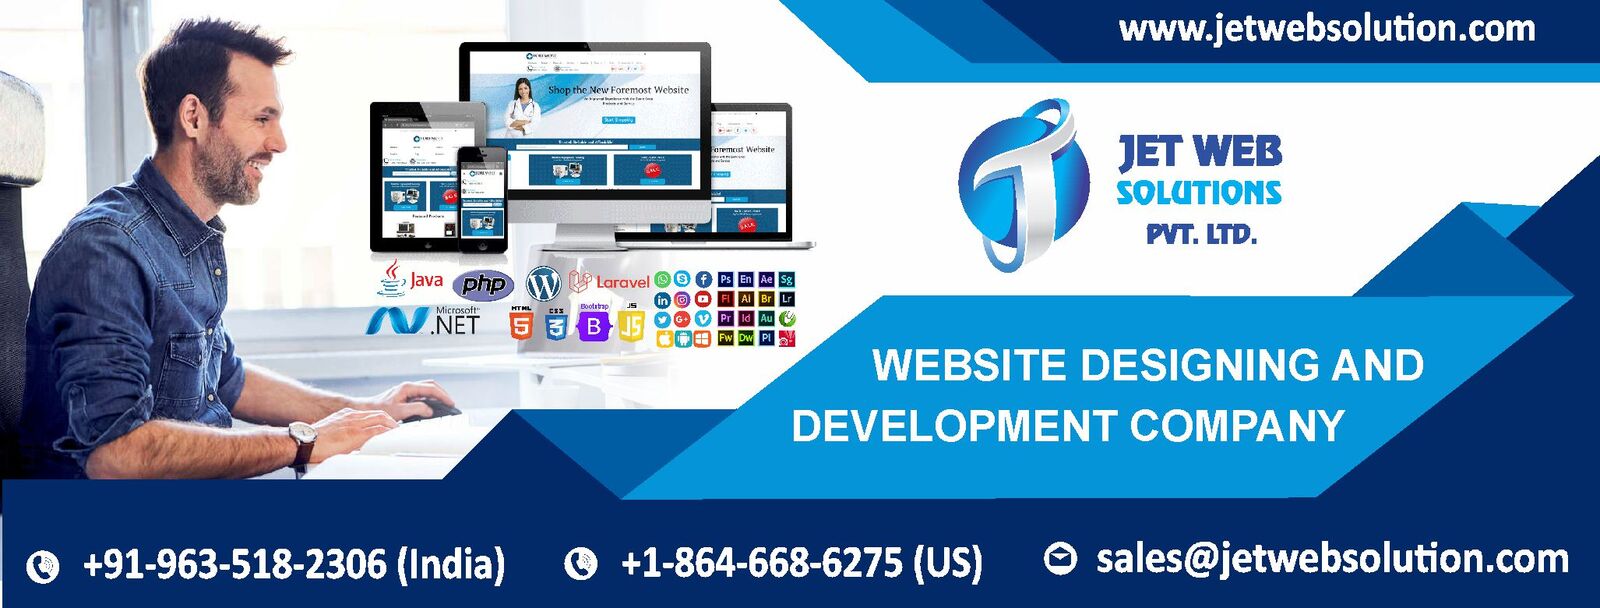 Jet web solutions| Get the best IT Solutions and Web Development services